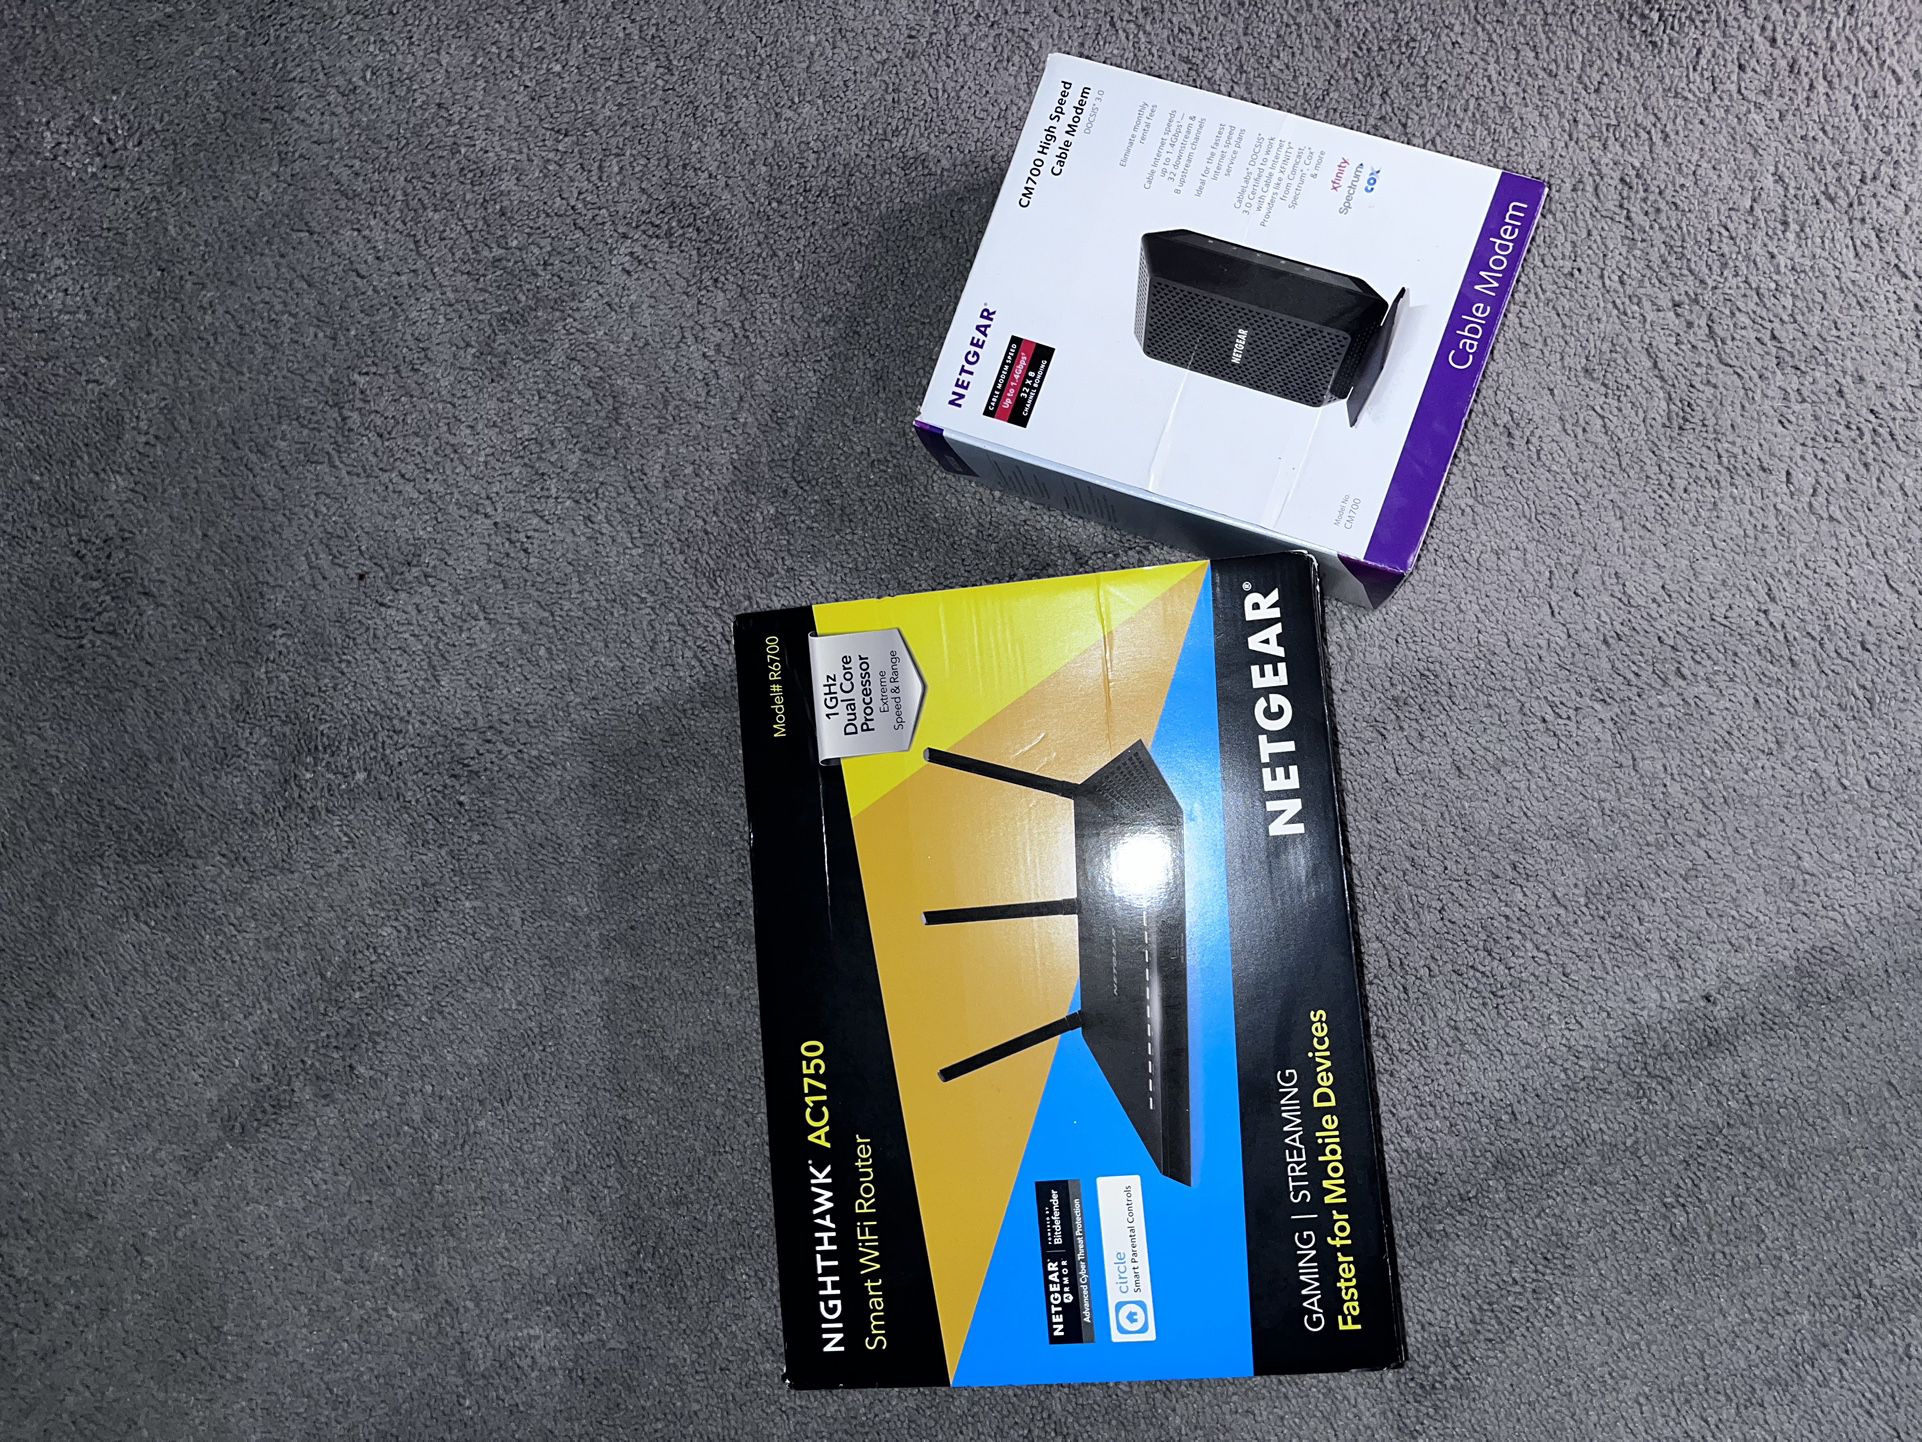 Netgear Cable Modem And Wi-Fi Router